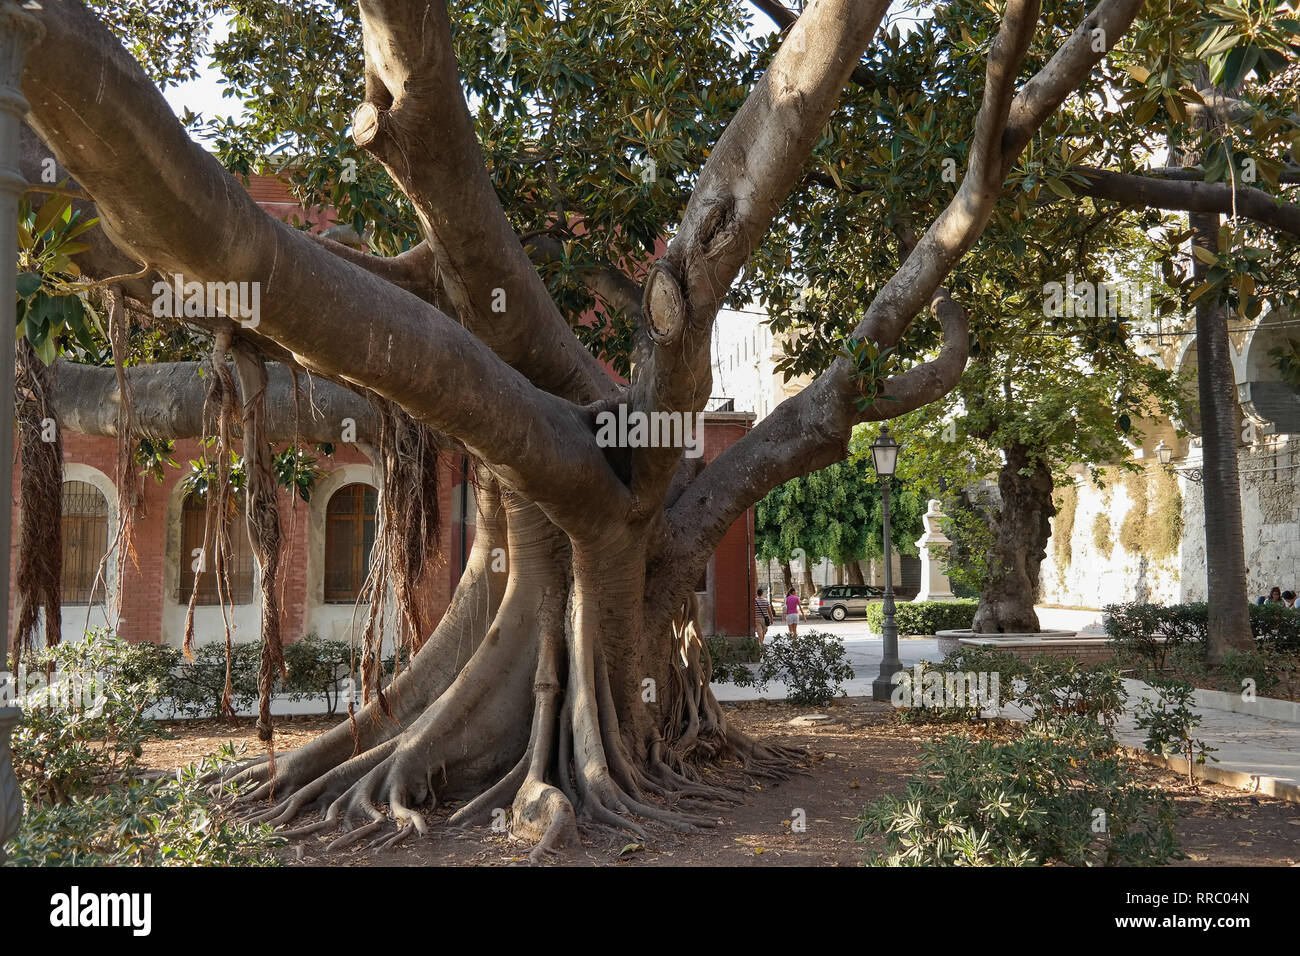 Ficus macrophylla, known as Moreton Bay fig or Australian banyan, is large evergreen tree of family Moraceae. Big banyan ficus with its buttress roots Stock Photo